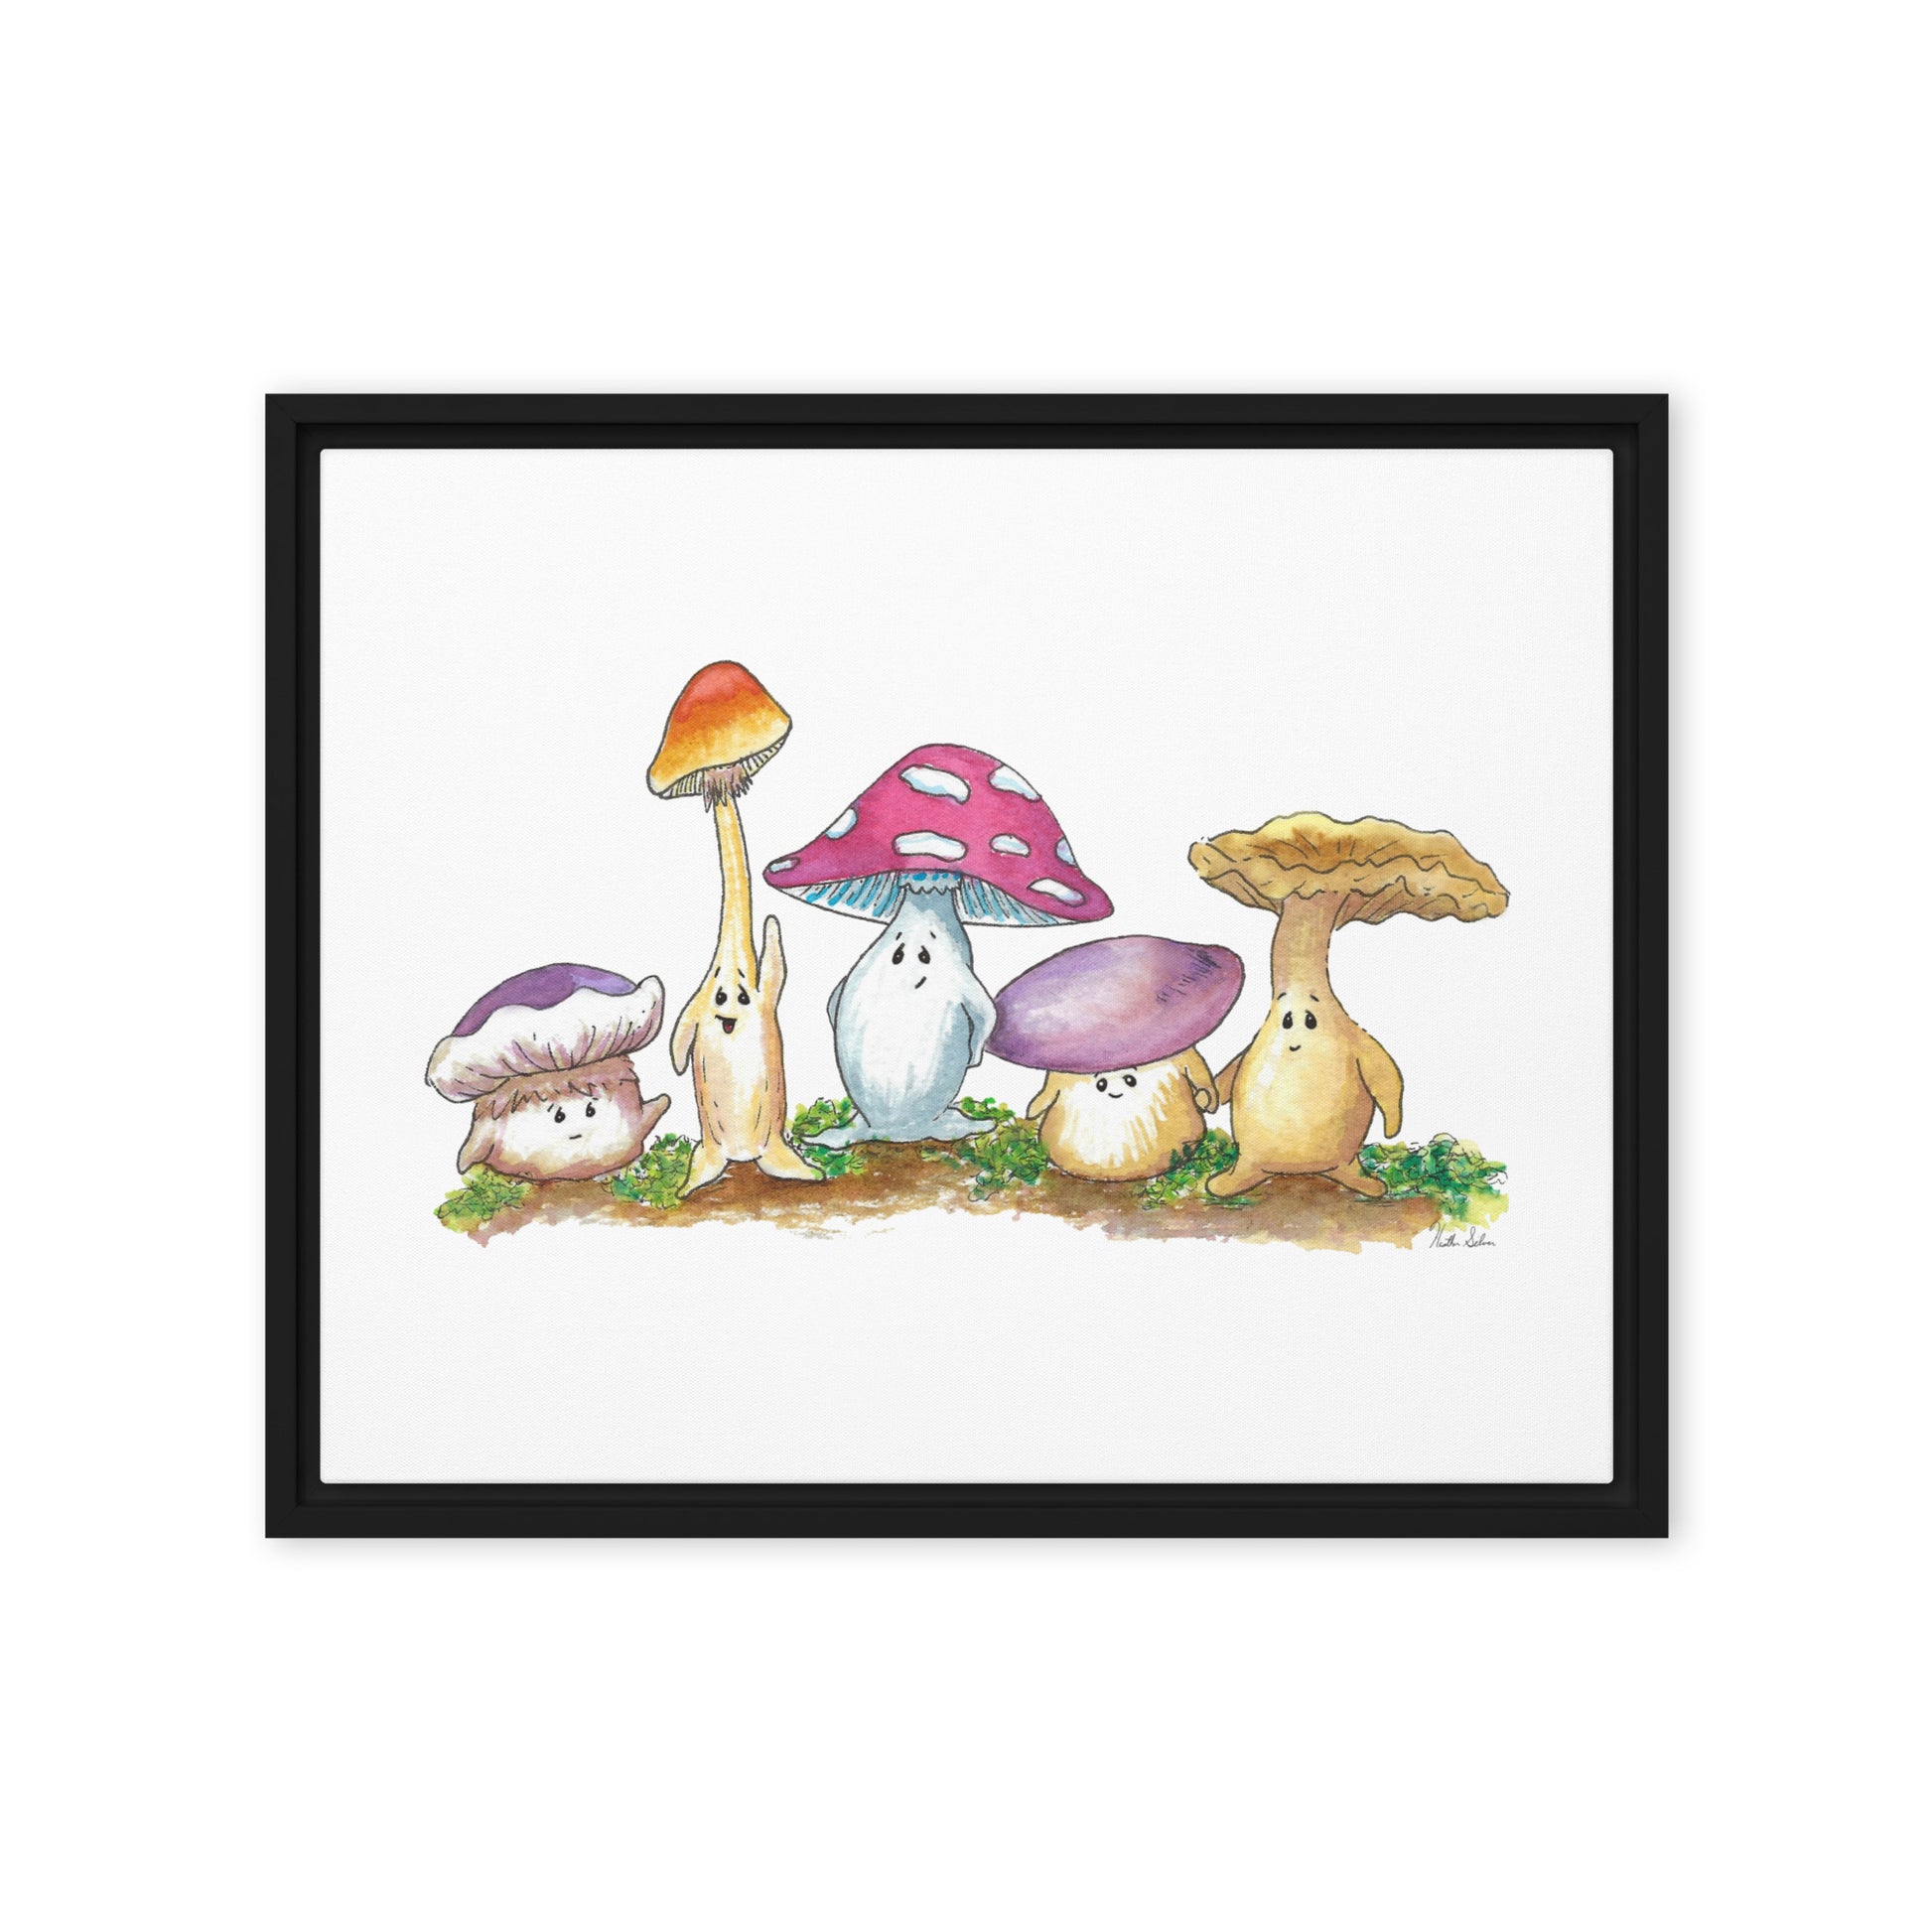 16 by 20 inch canvas print of Heather Silver's watercolor painting, Mushy and Friends. Framed in a black pine wood frame that gives it a floating canvas effect.